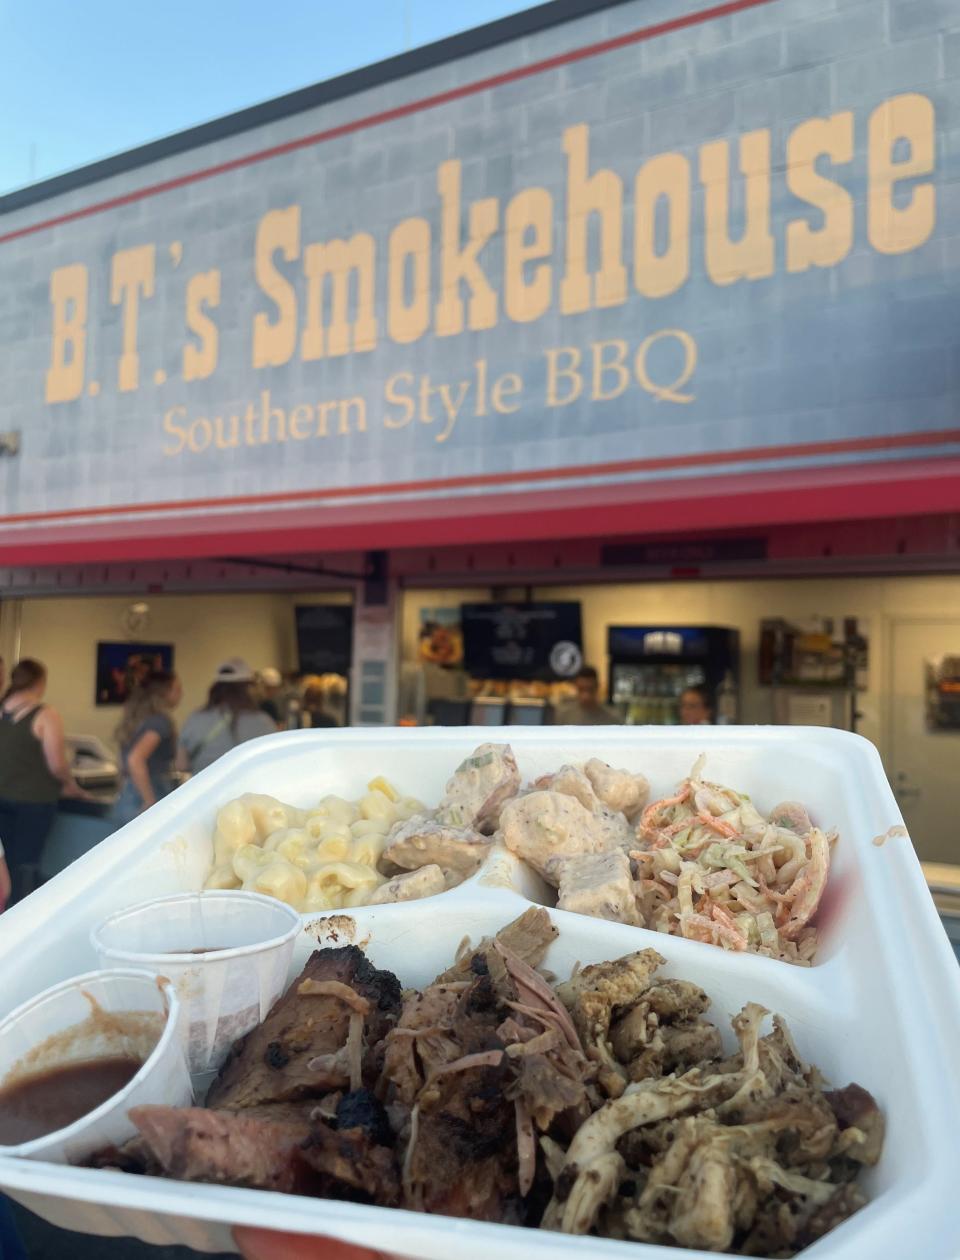 The B.T.'s Smokehouse stand will not return this season to Polar Park.